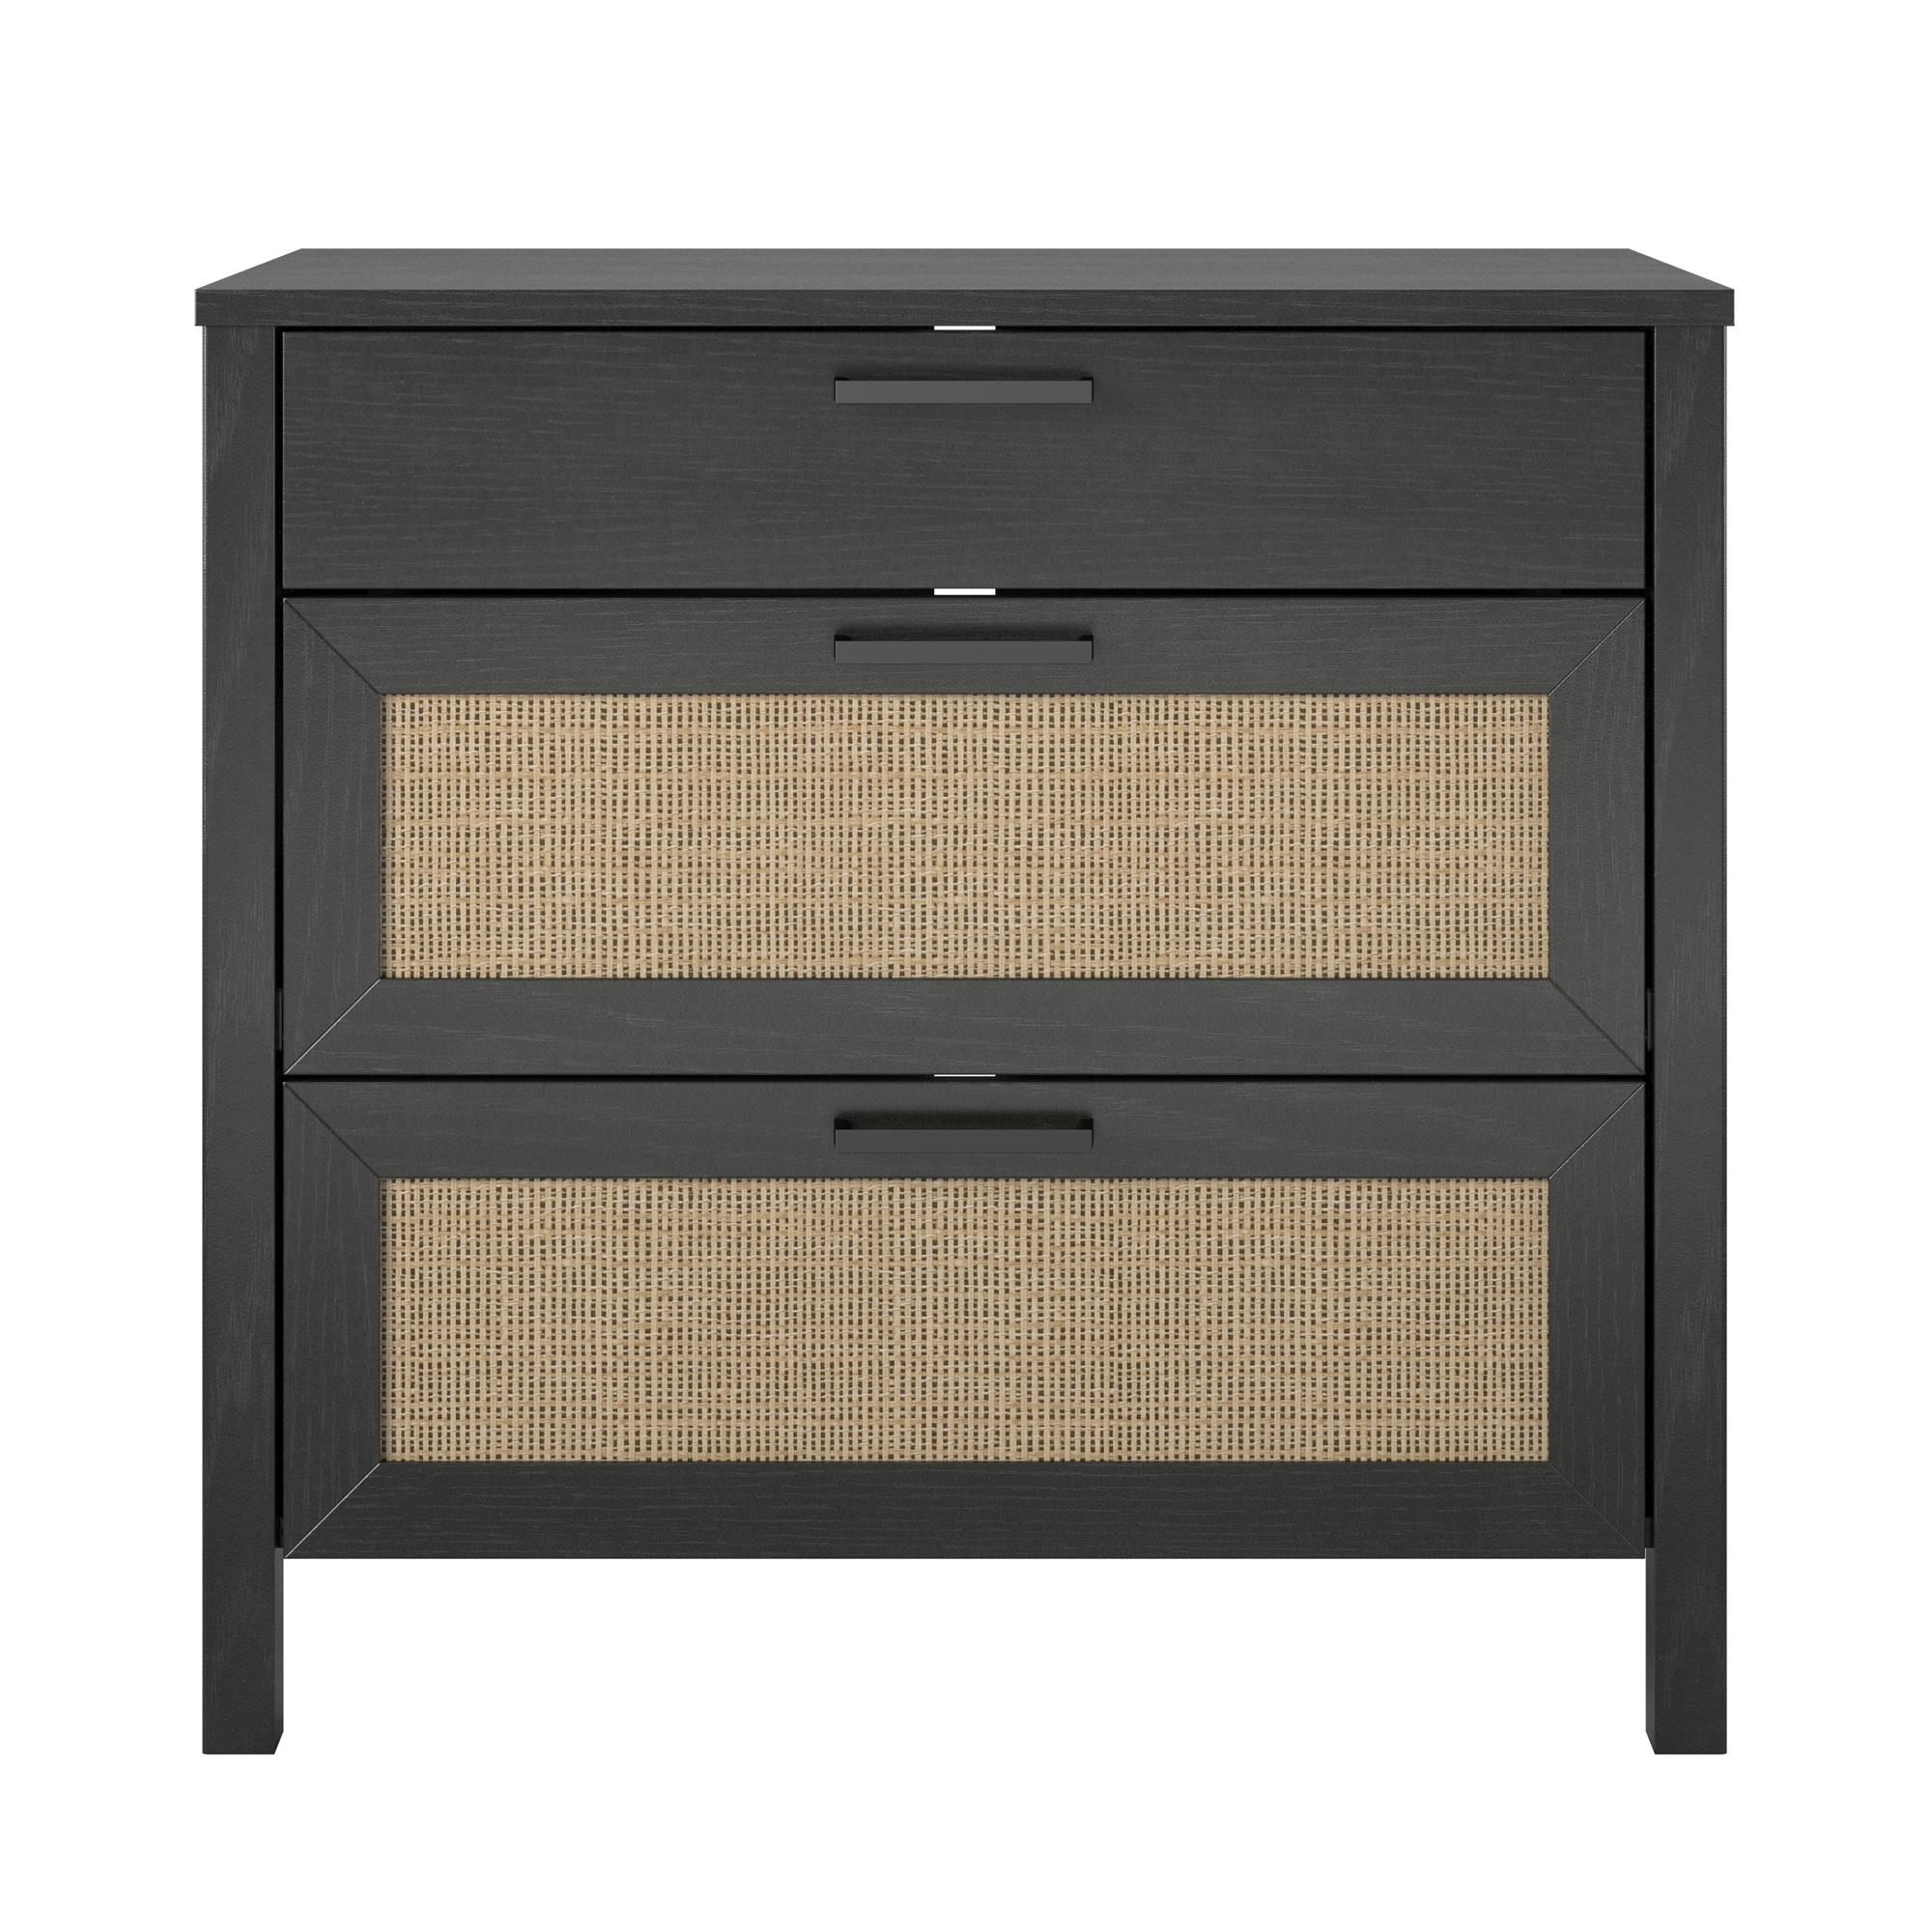 Ameriwood Home Wimberly 3-Drawer Dresser, Black Oak with Faux Rattan - image 4 of 11